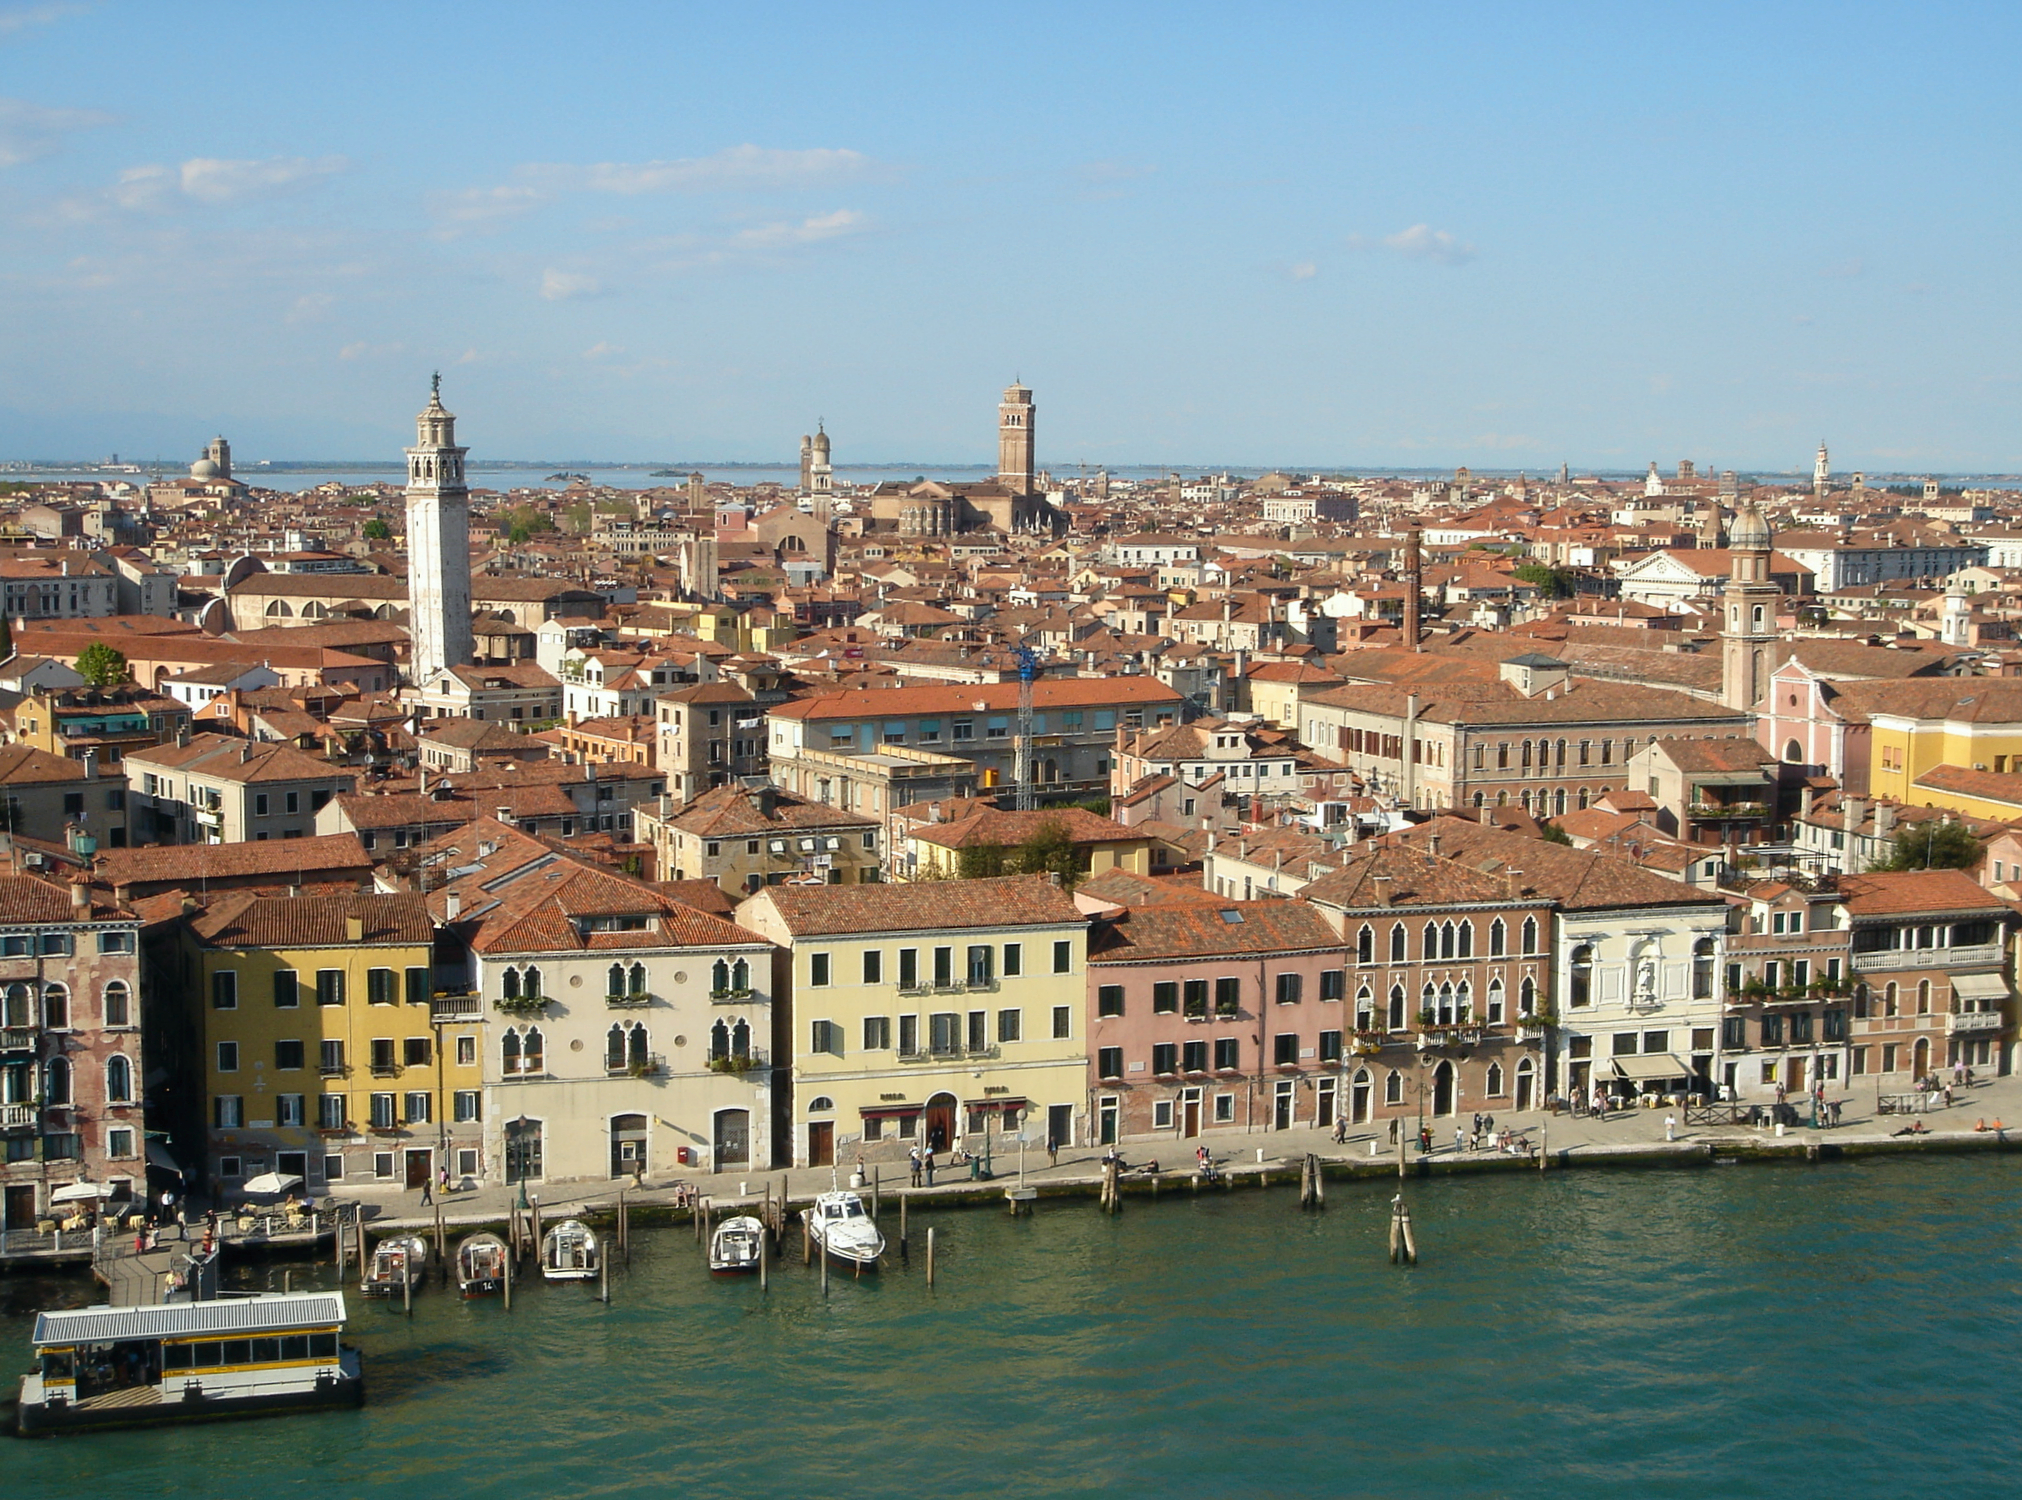 venice-view-from-ship-1-2008.jpg